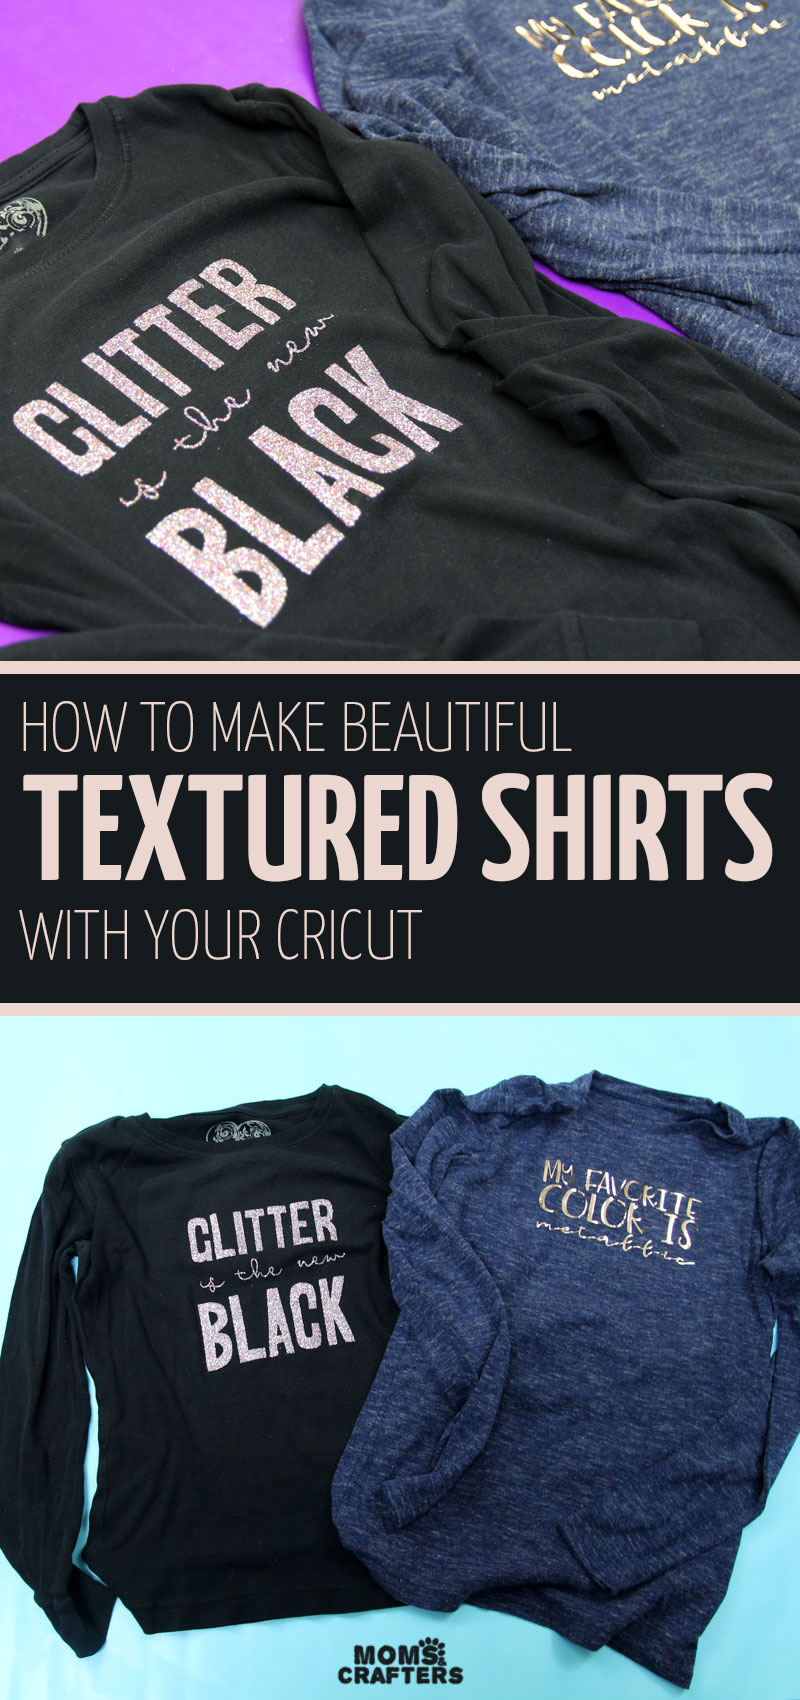 Click to hearl how to make a tshirt with Cricut Explore Air 2 and EasyPress 2 including the free design mat (no SVG needed). You'll also learn how to edit text for shirts in Design Space.